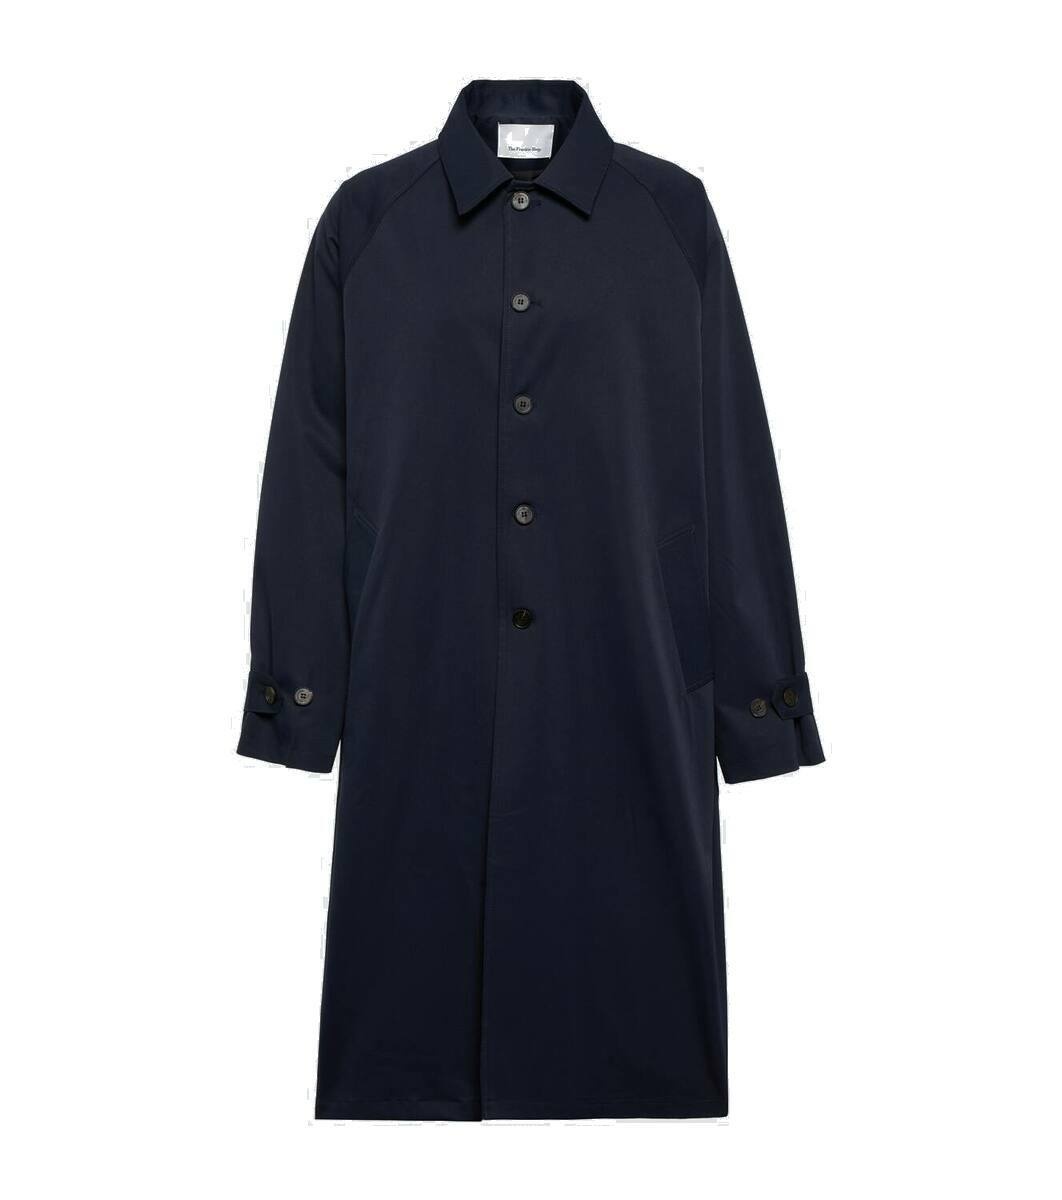 Photo: The Frankie Shop Gaia oversized double-breasted coat